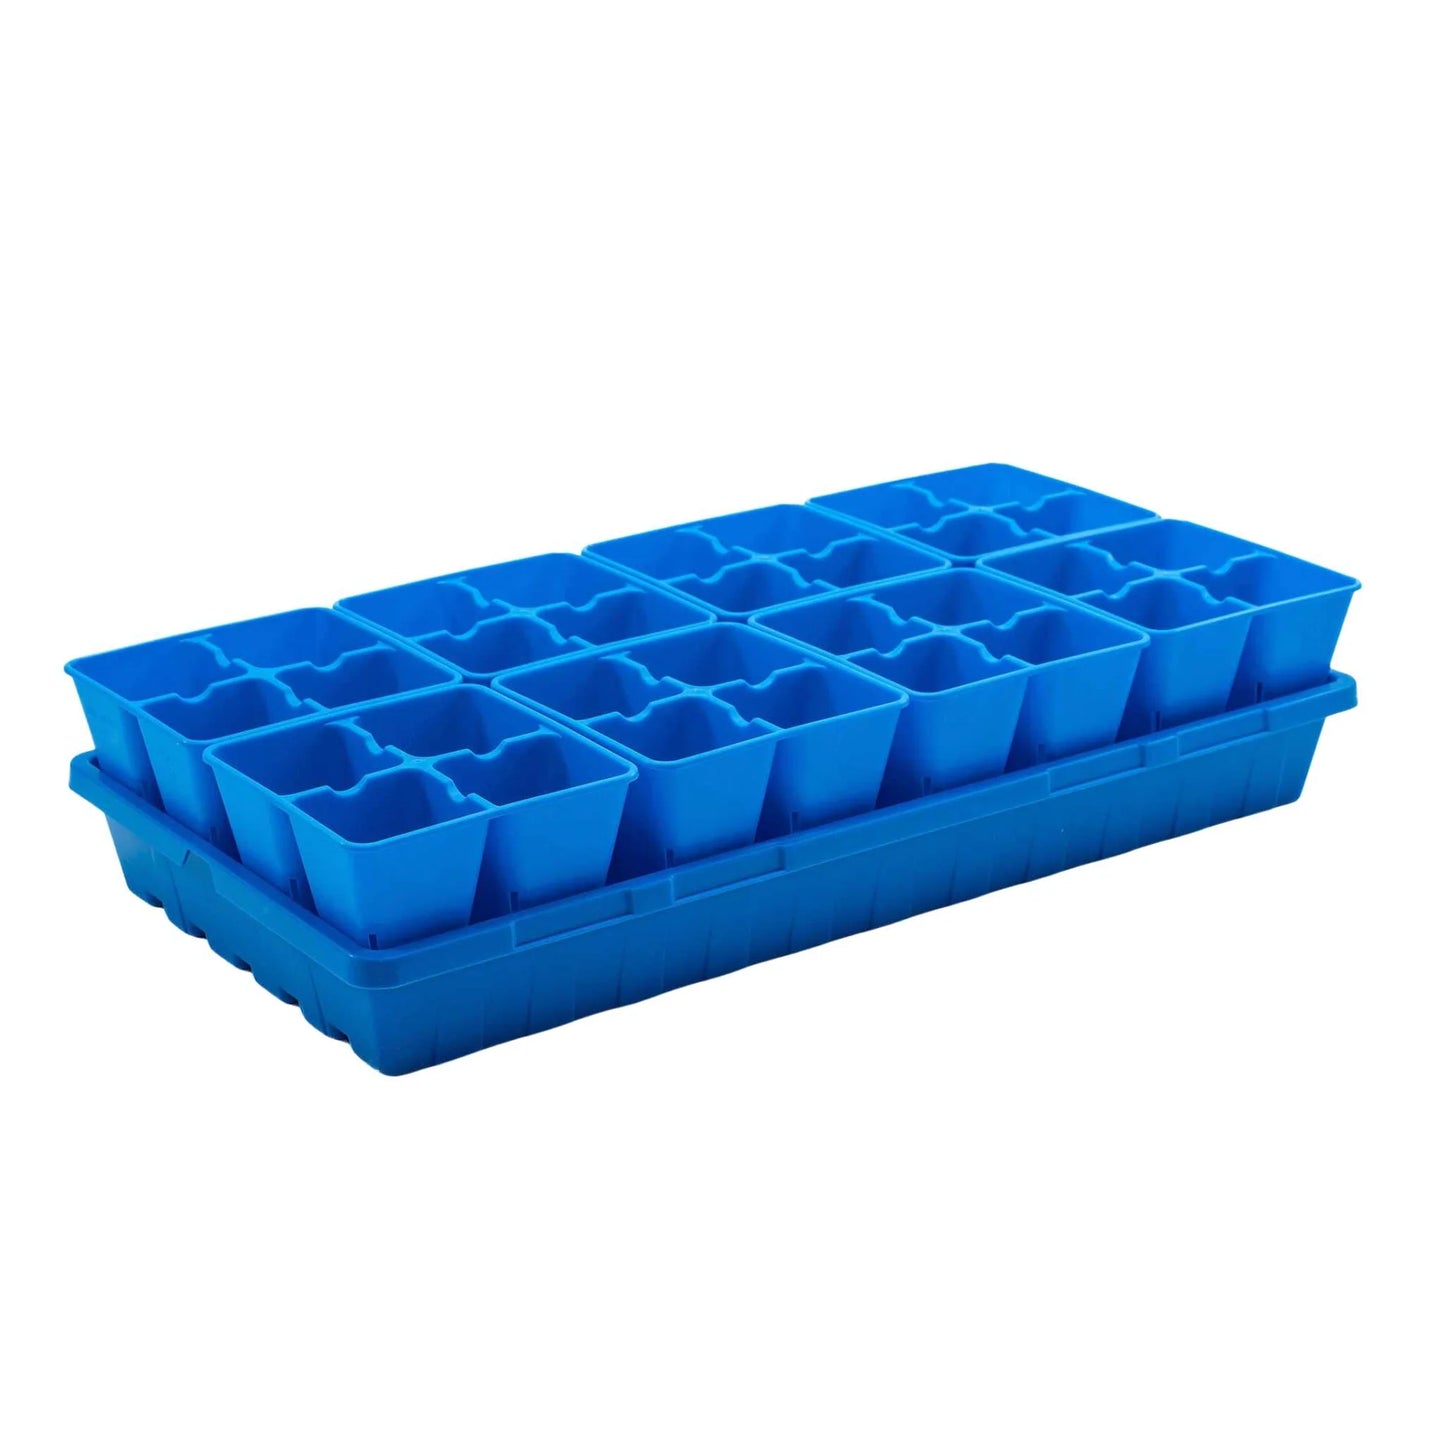 4 Cell Seed Starting Tray Insert